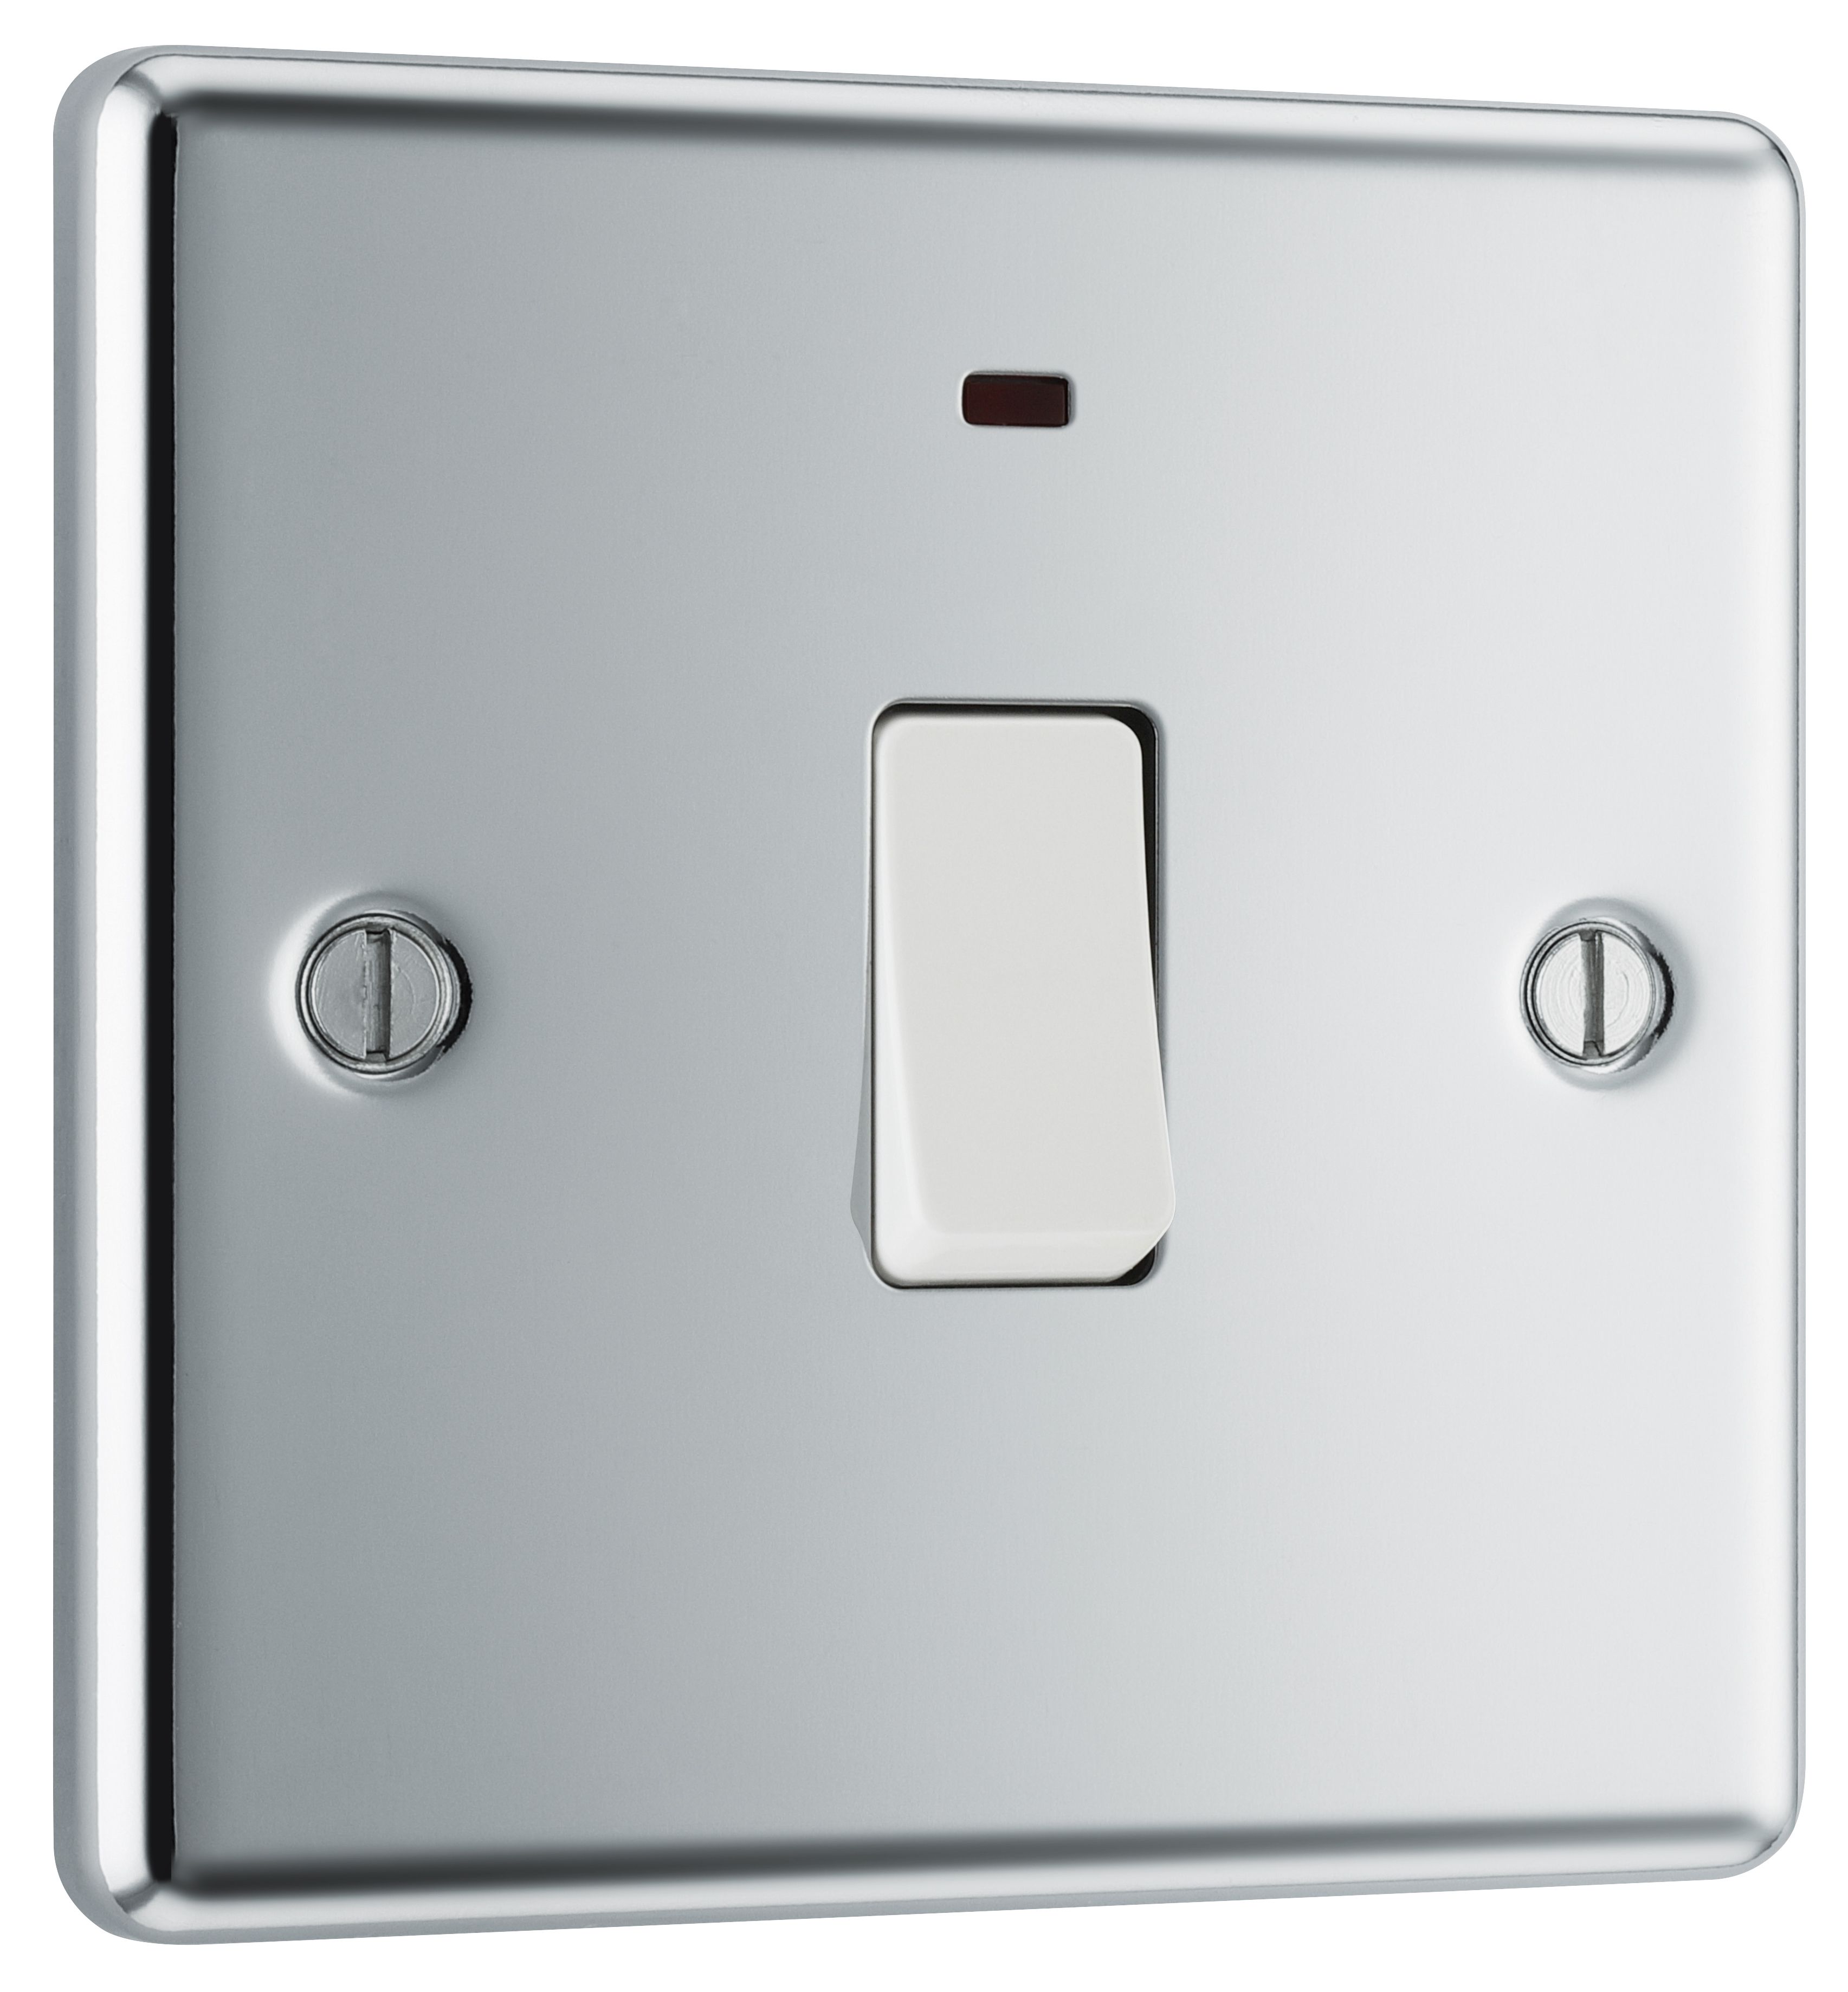 GoodHome 20A Rocker Raised rounded Control switch with LED indicator Chrome effect